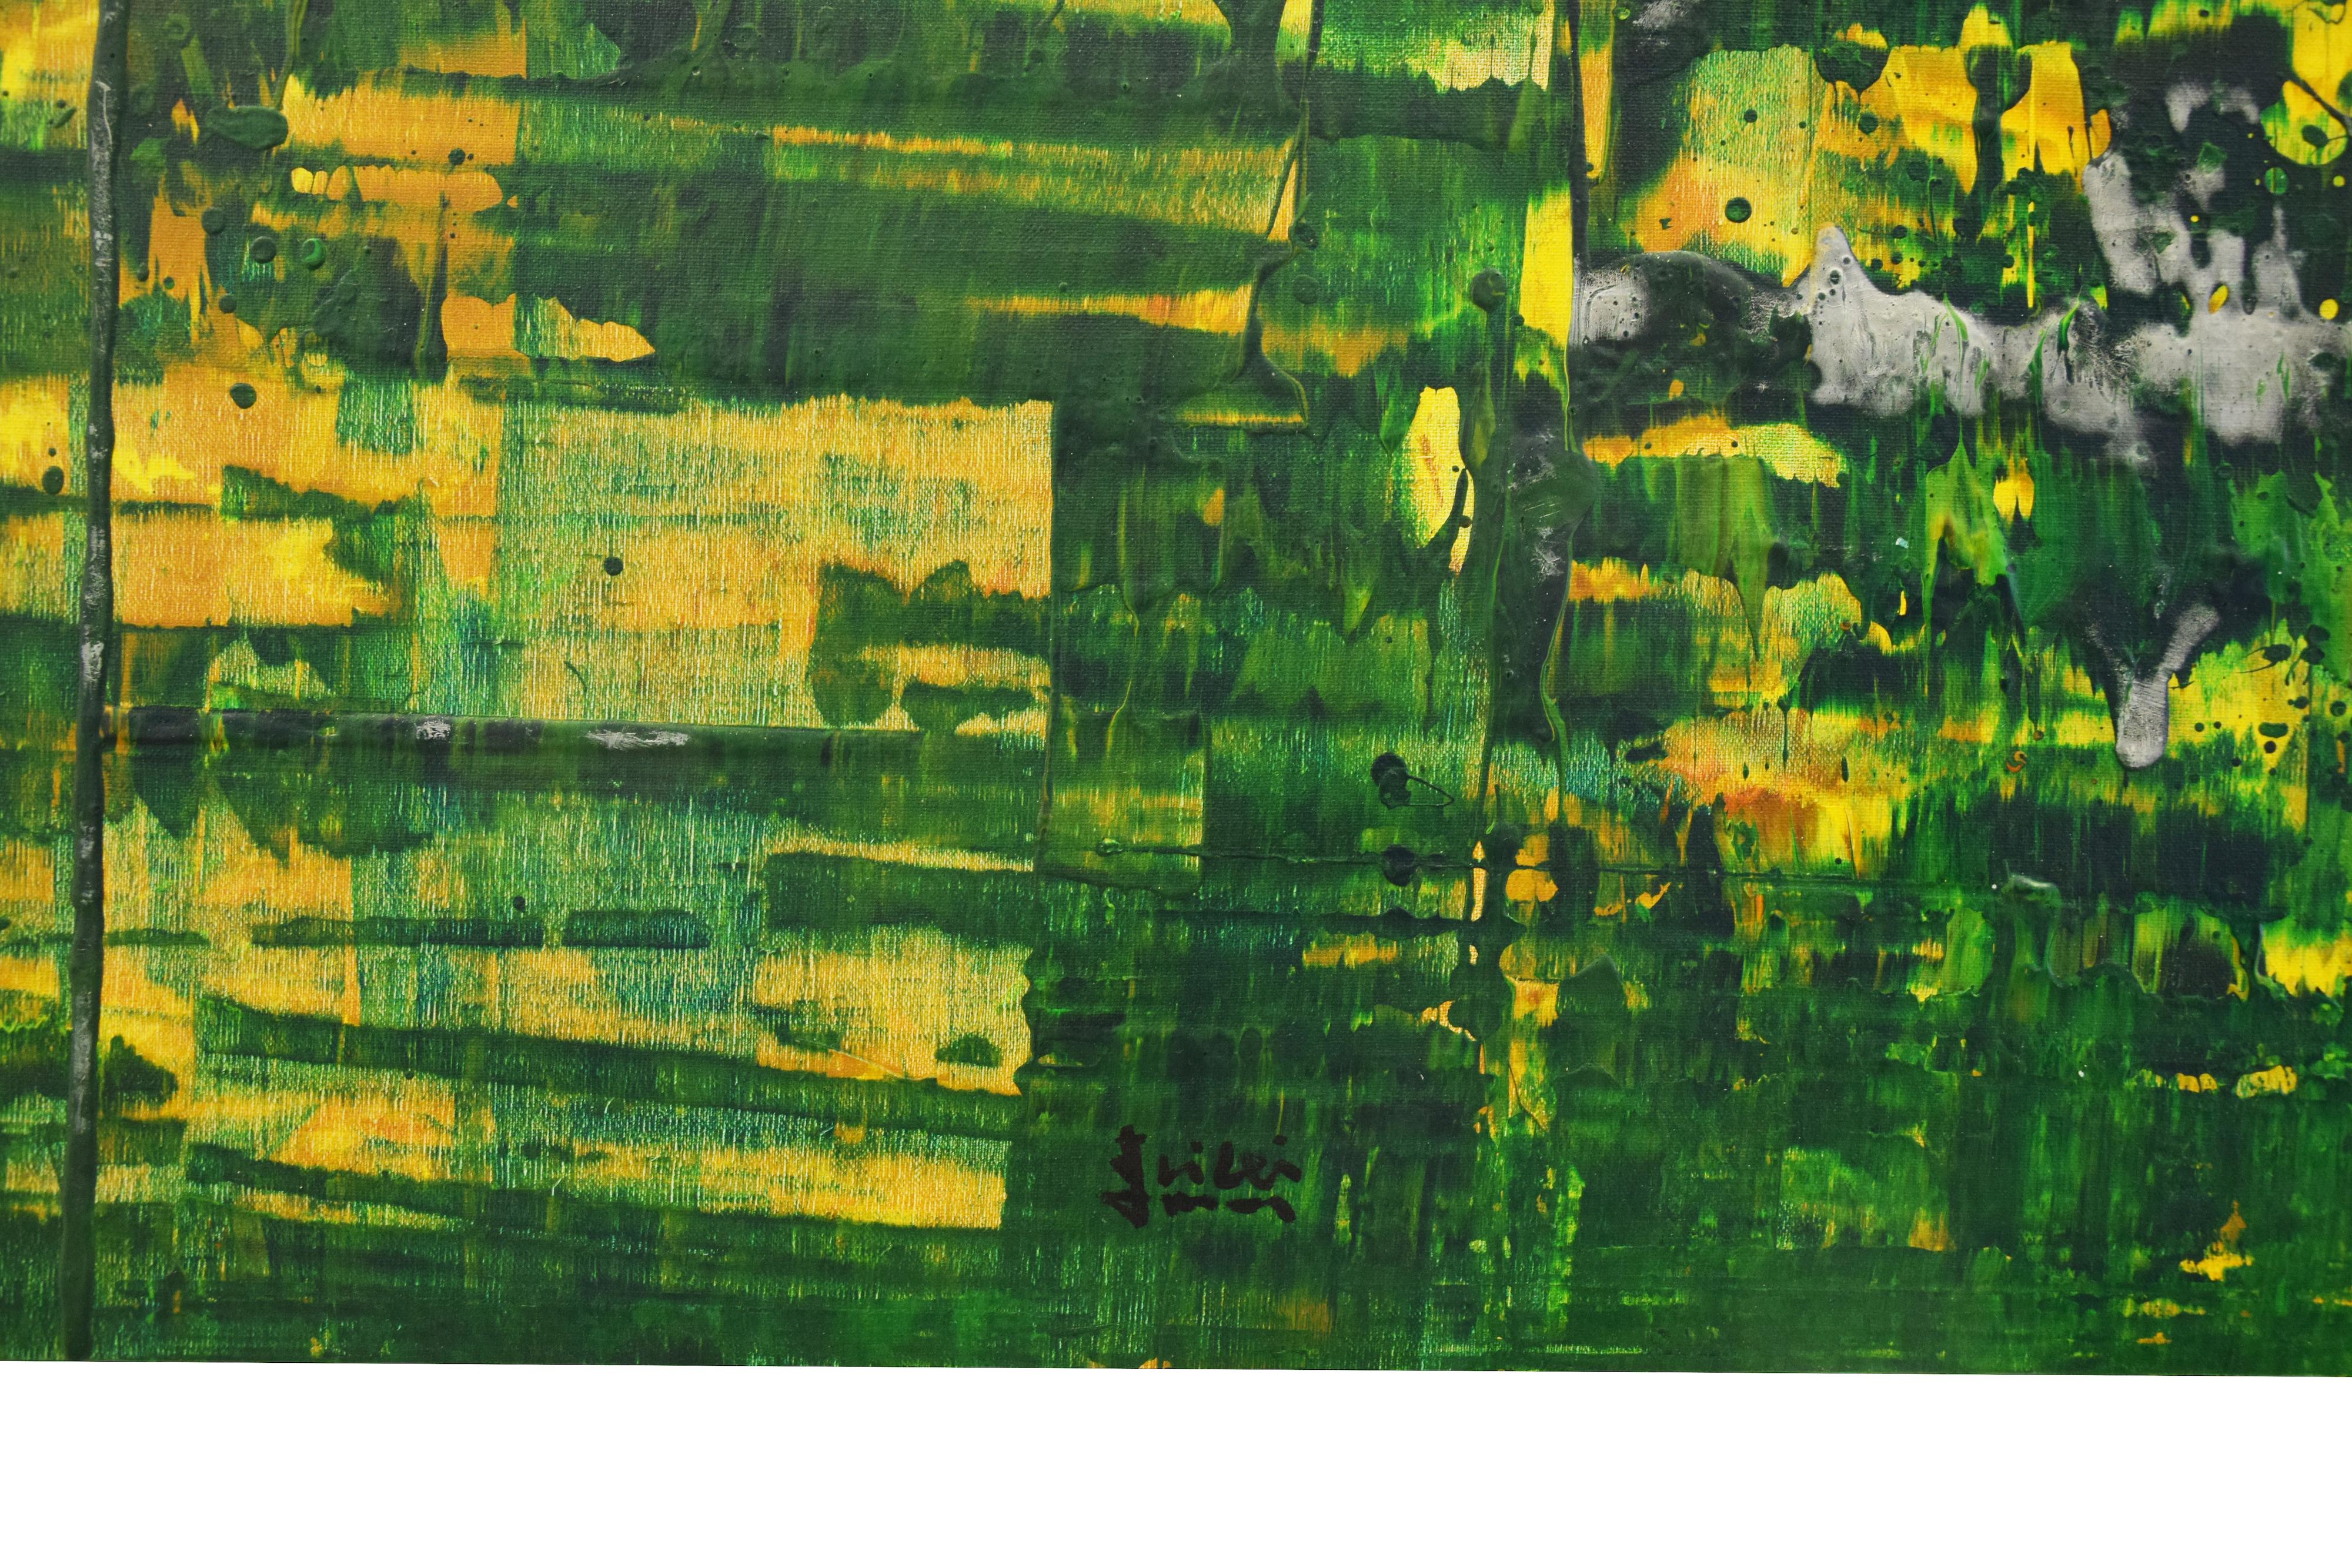 Spring Water Joins Heaven is a fascinating abstract painting realized by the contemporary artist Li Lei in 2007.

This vertical original artwork represents an abstract composition in dark green and fluo-yellow. The brushwork is unexpected: the